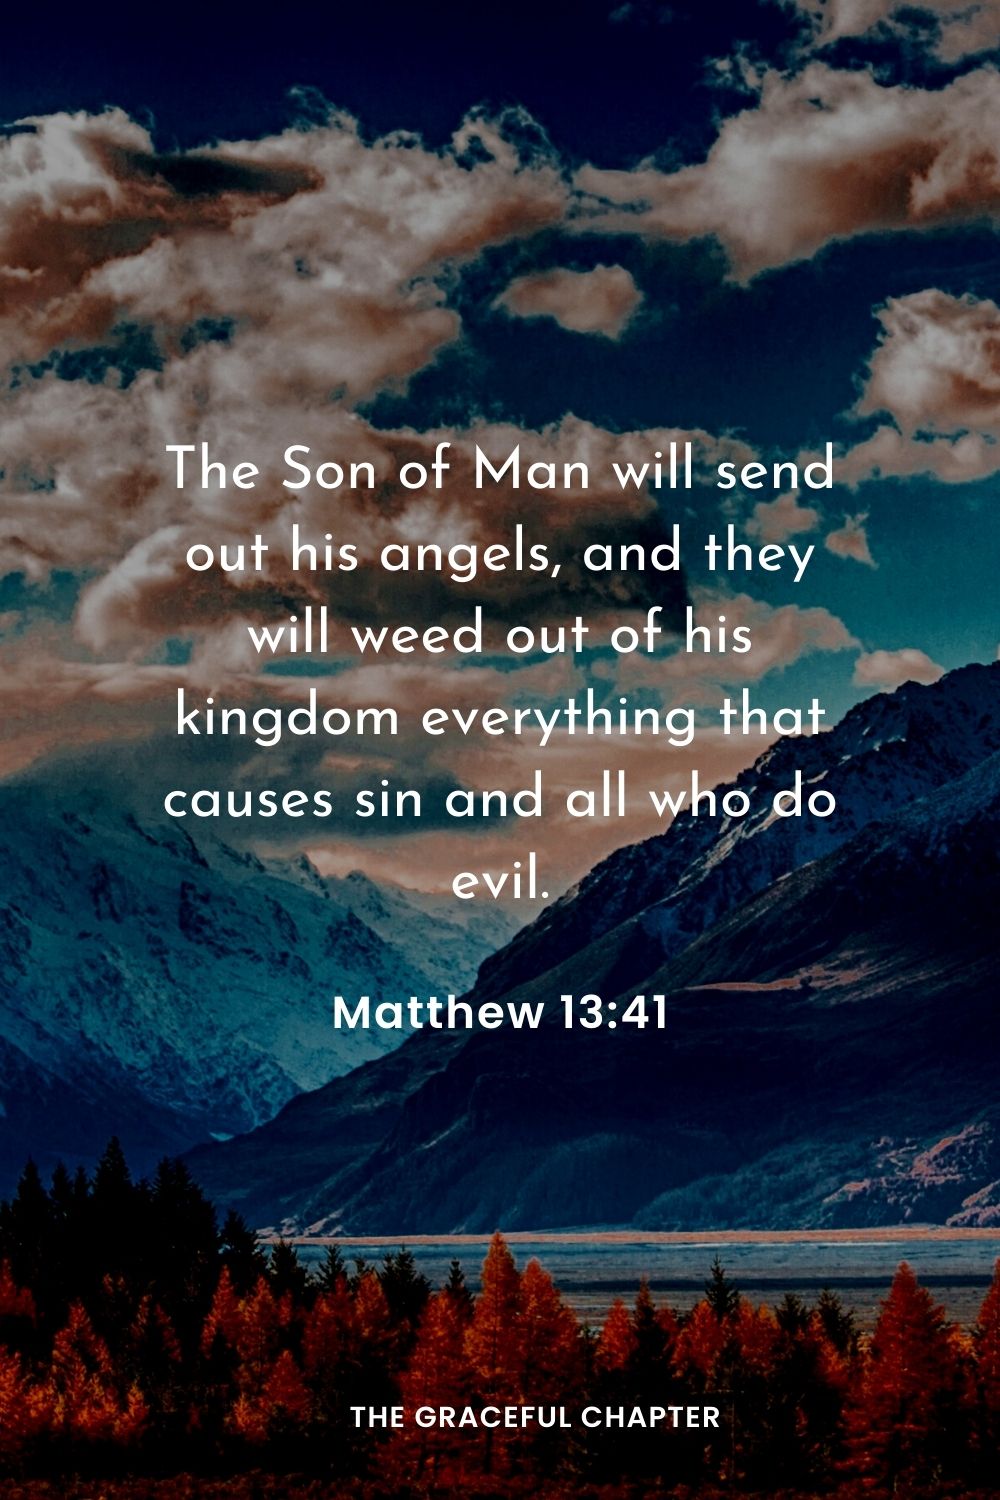 The Son of Man will send out his angels, and they will weed out of his kingdom everything that causes sin and all who do evil.